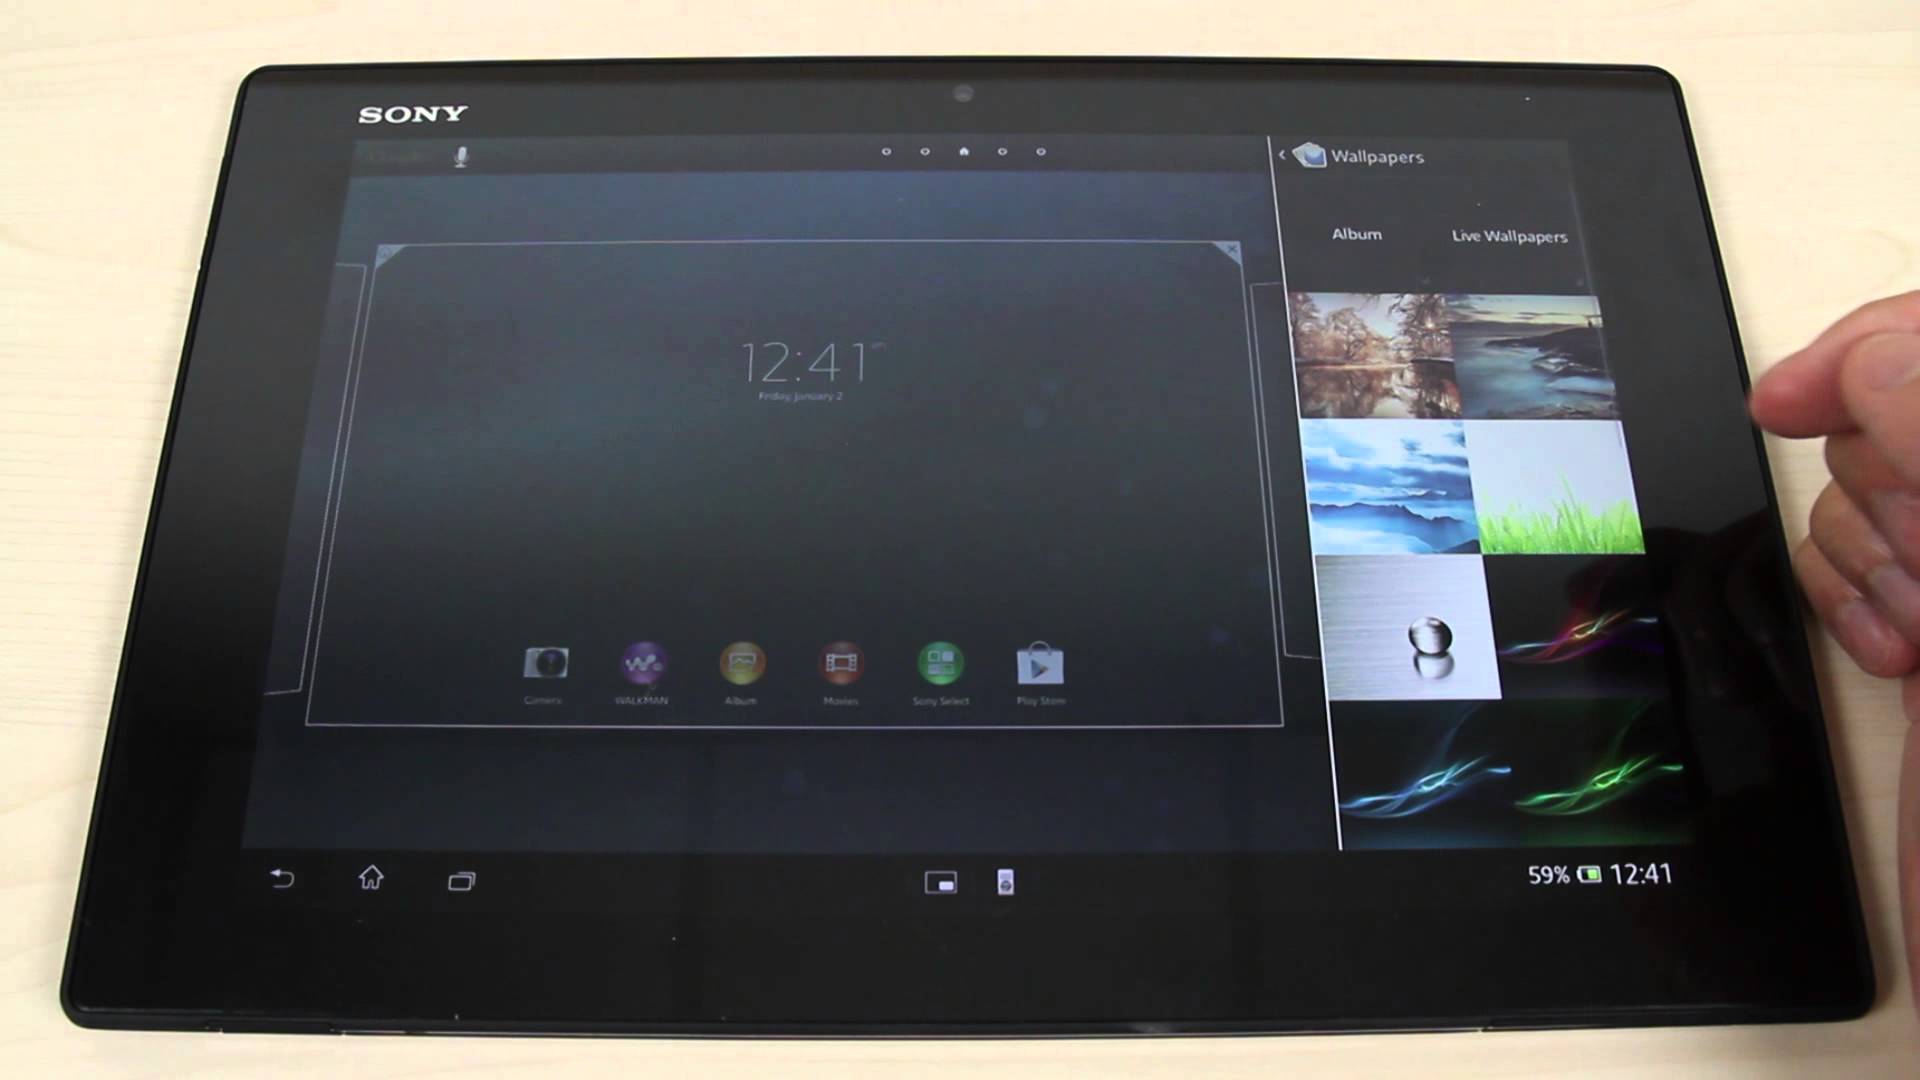 The Theme And Lock Screen Wallpaper On Sony Xperia Tablet Z